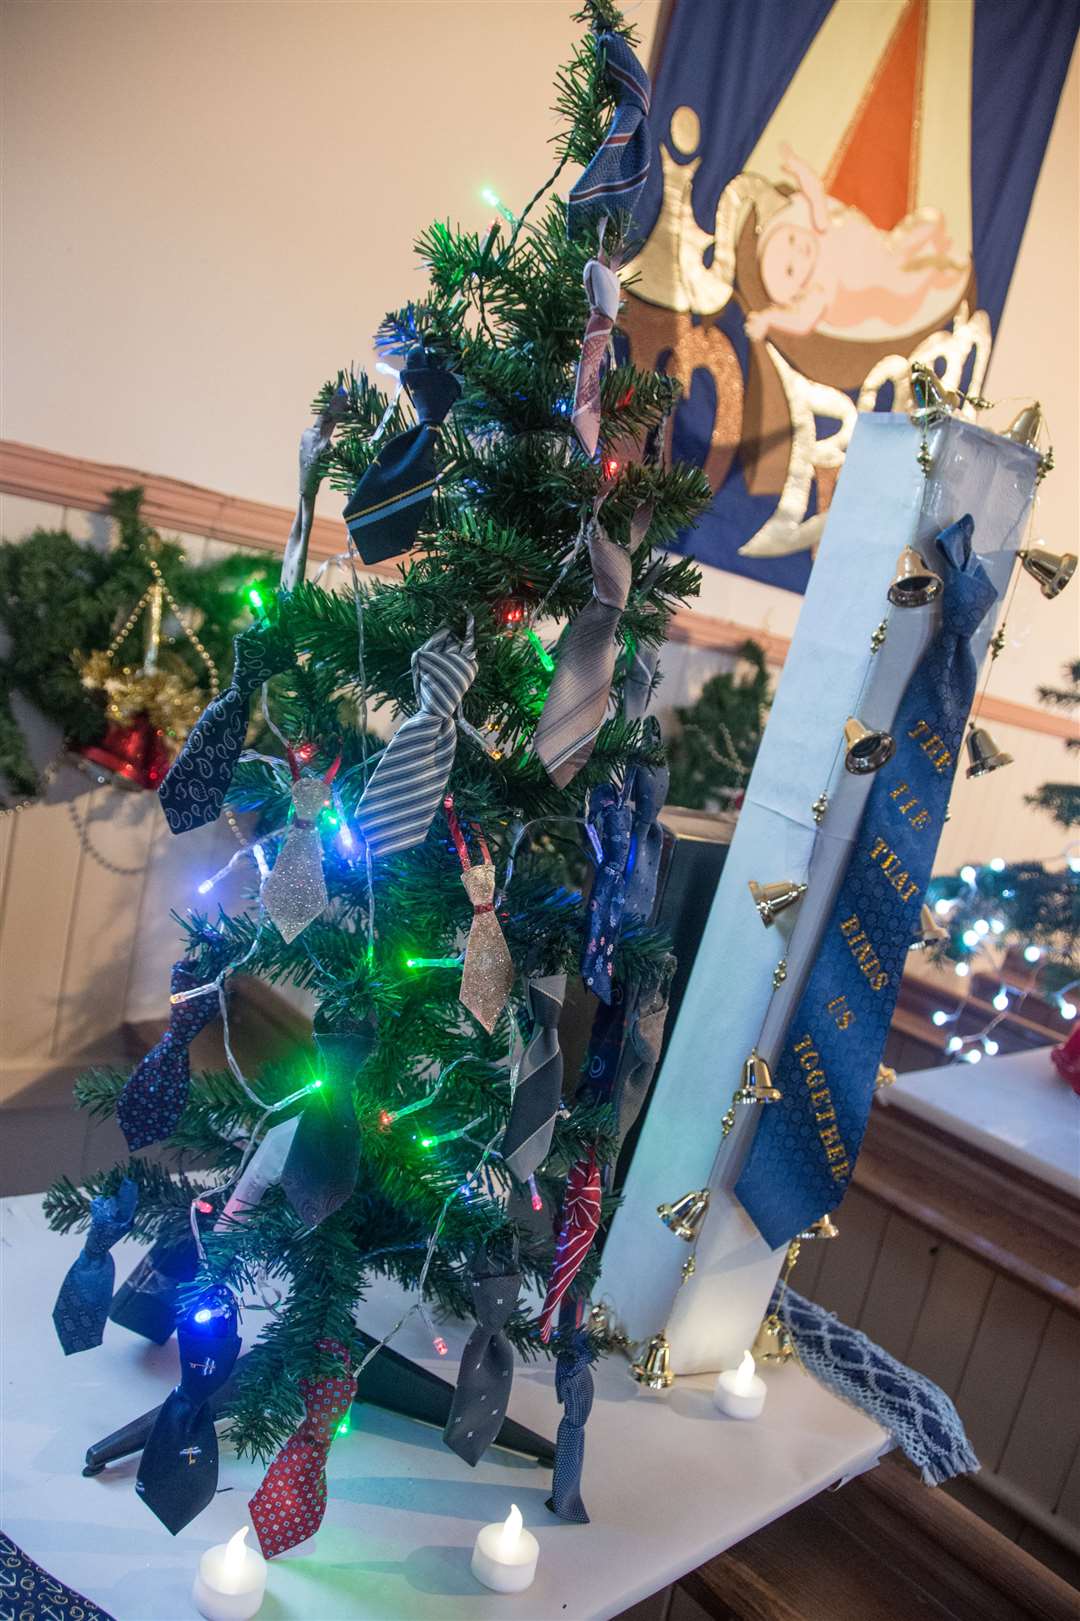 Another imaginative entry at the Festival of Trees. Picture: Becky Saunderson.